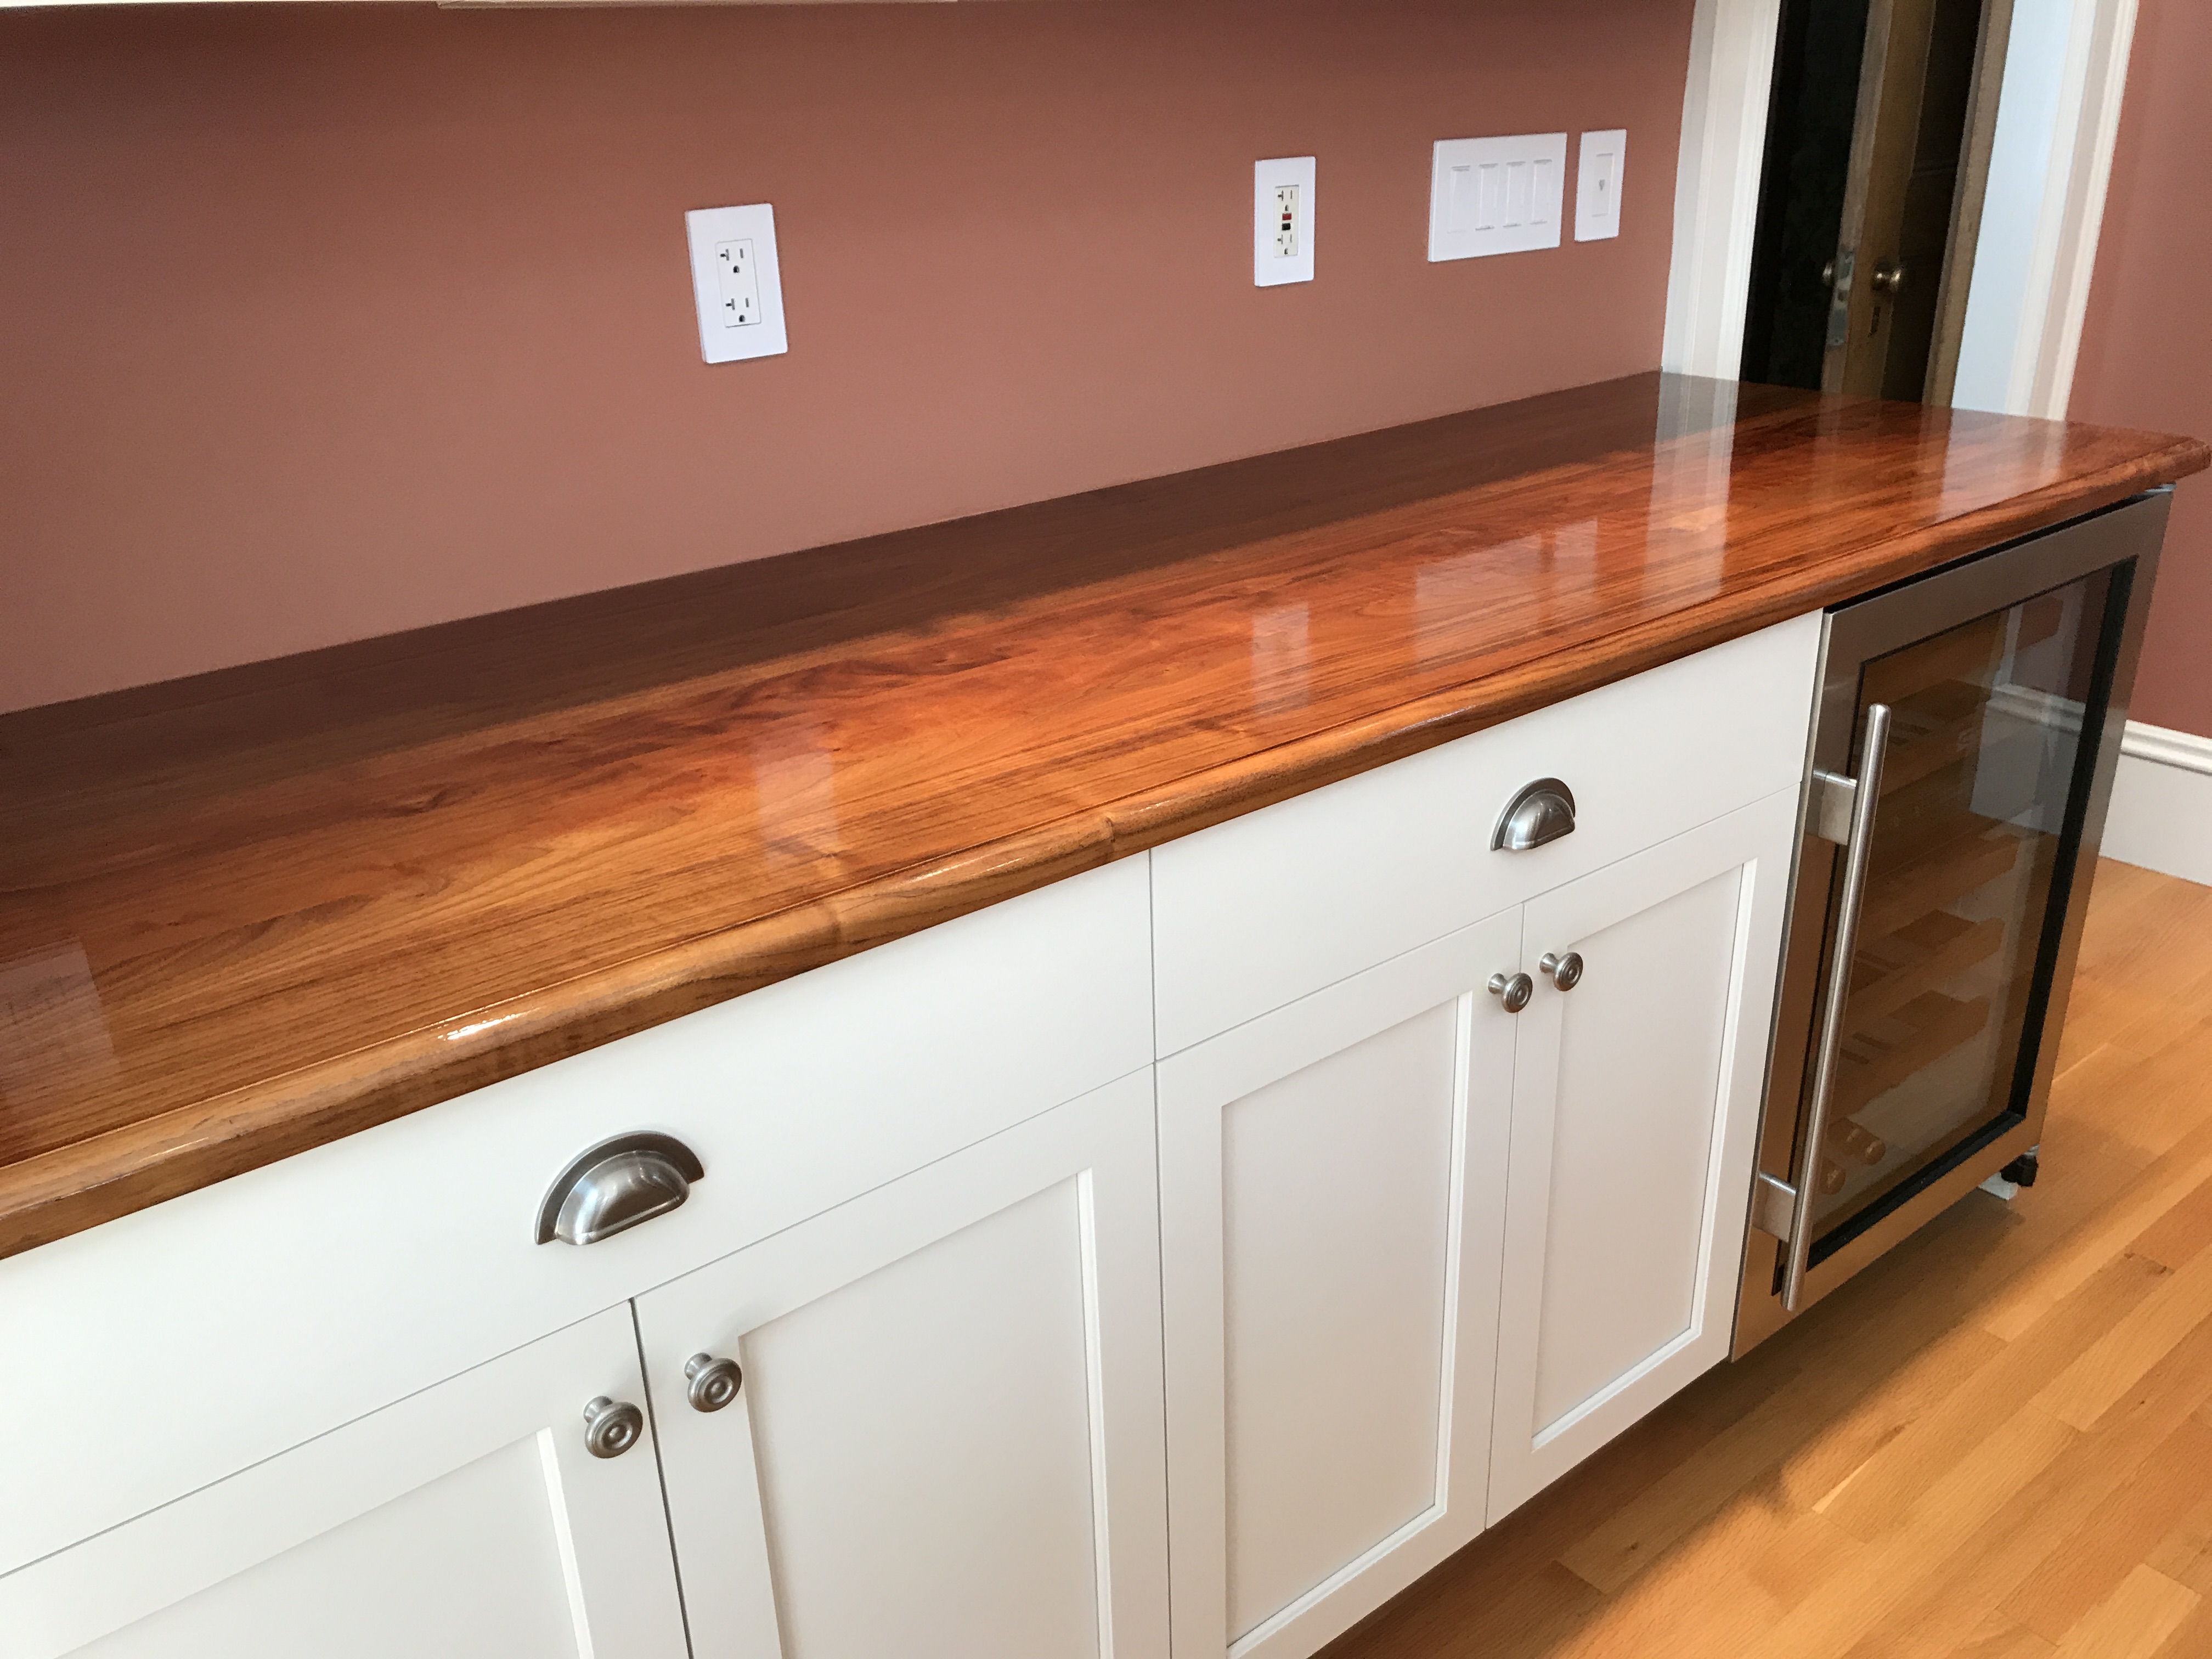 Durability With High Gloss Finishes, How To Make Wood Countertops Shine